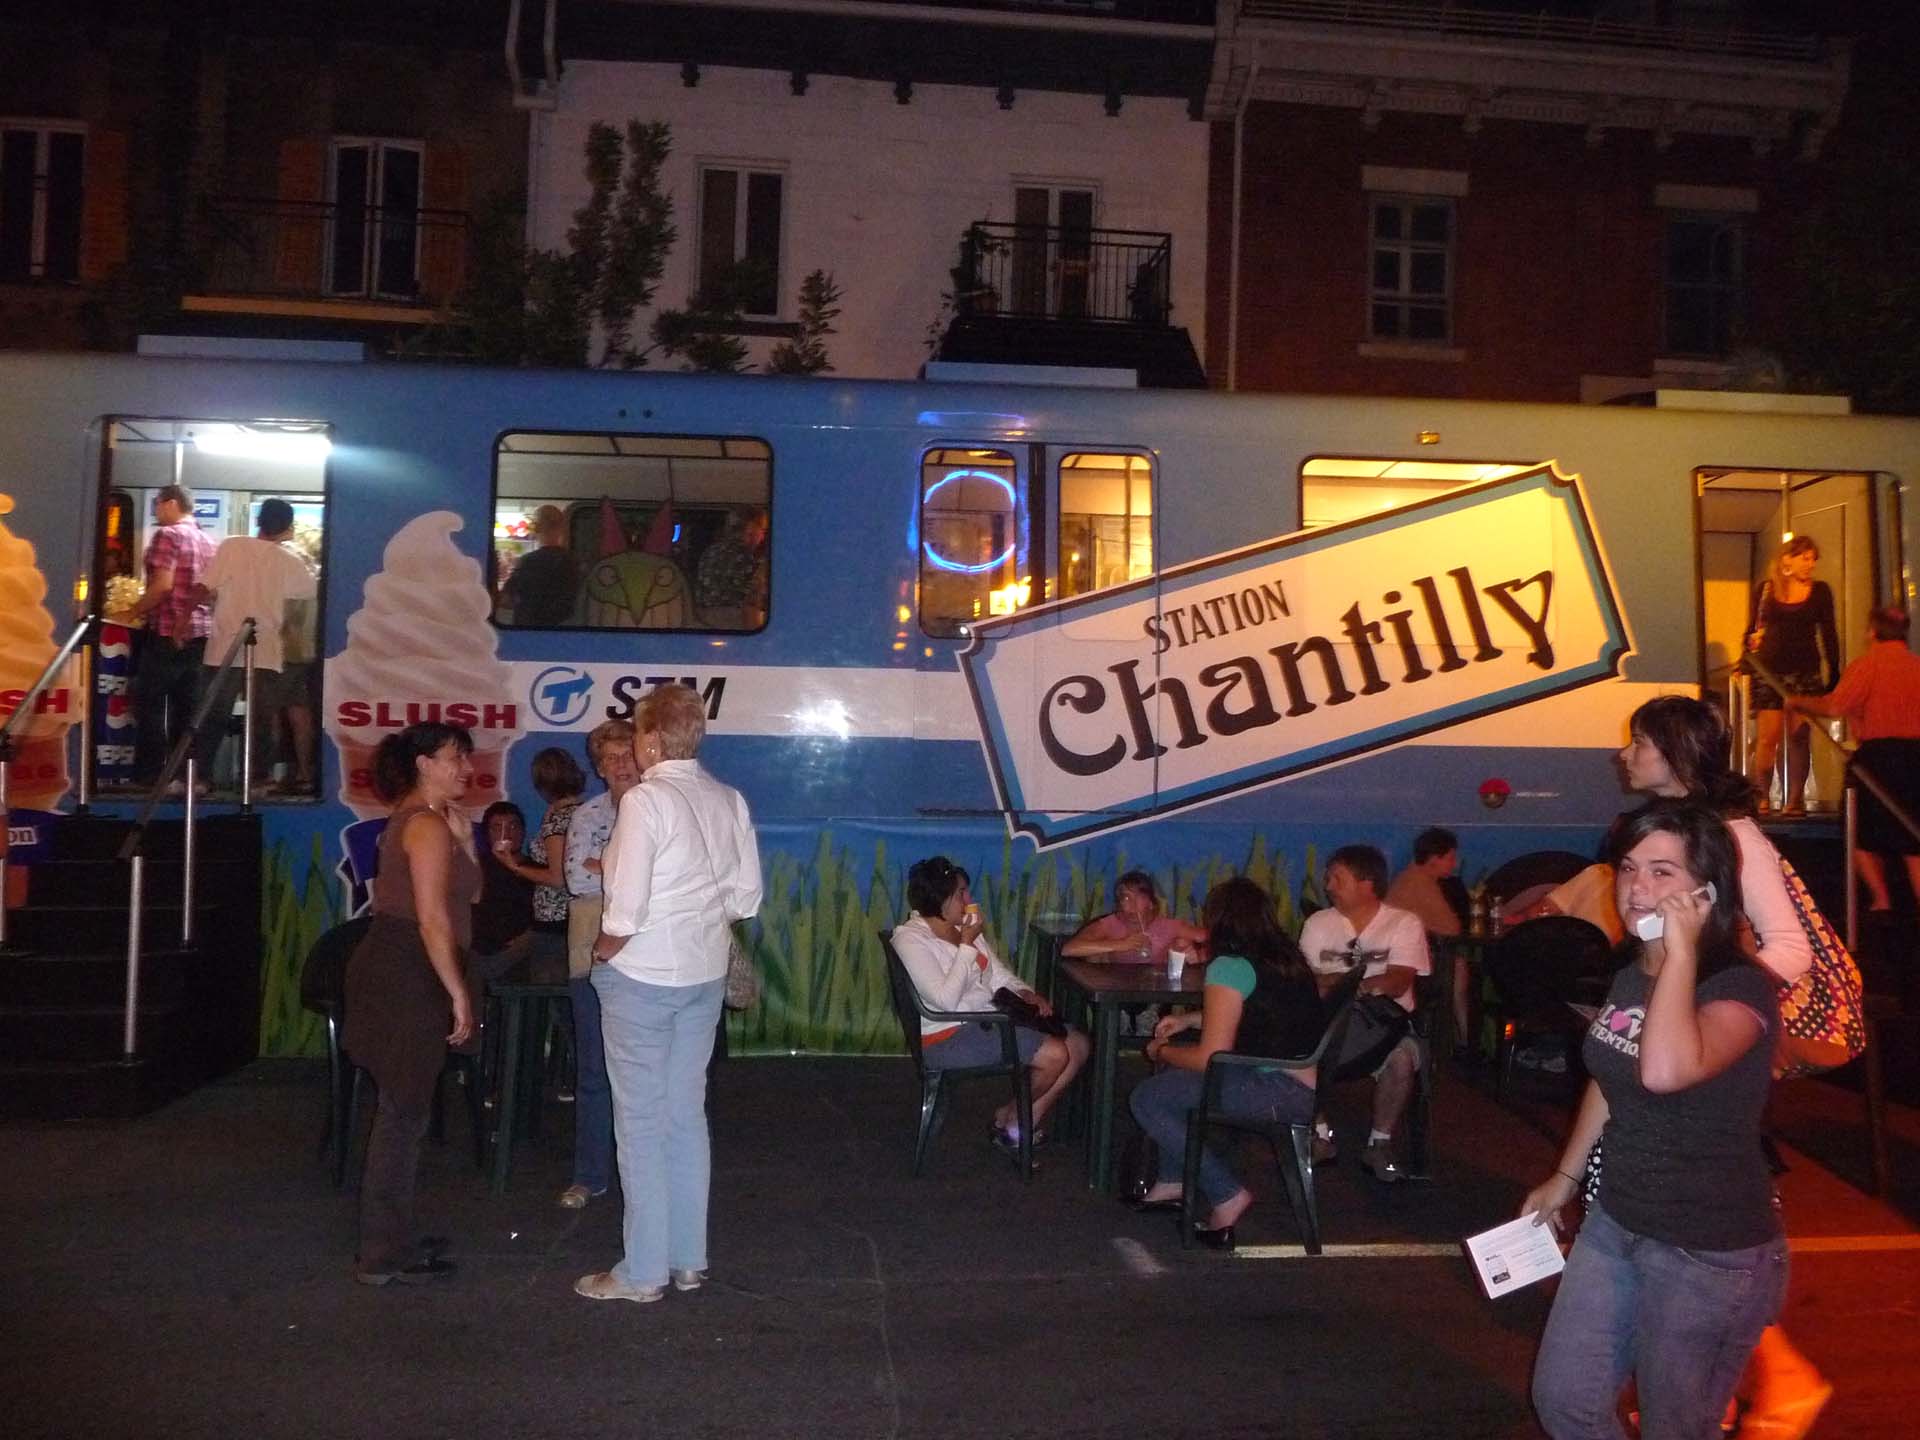 This restaurant called Station Chantilly was in a blue Mtro car at Just for Laughs.